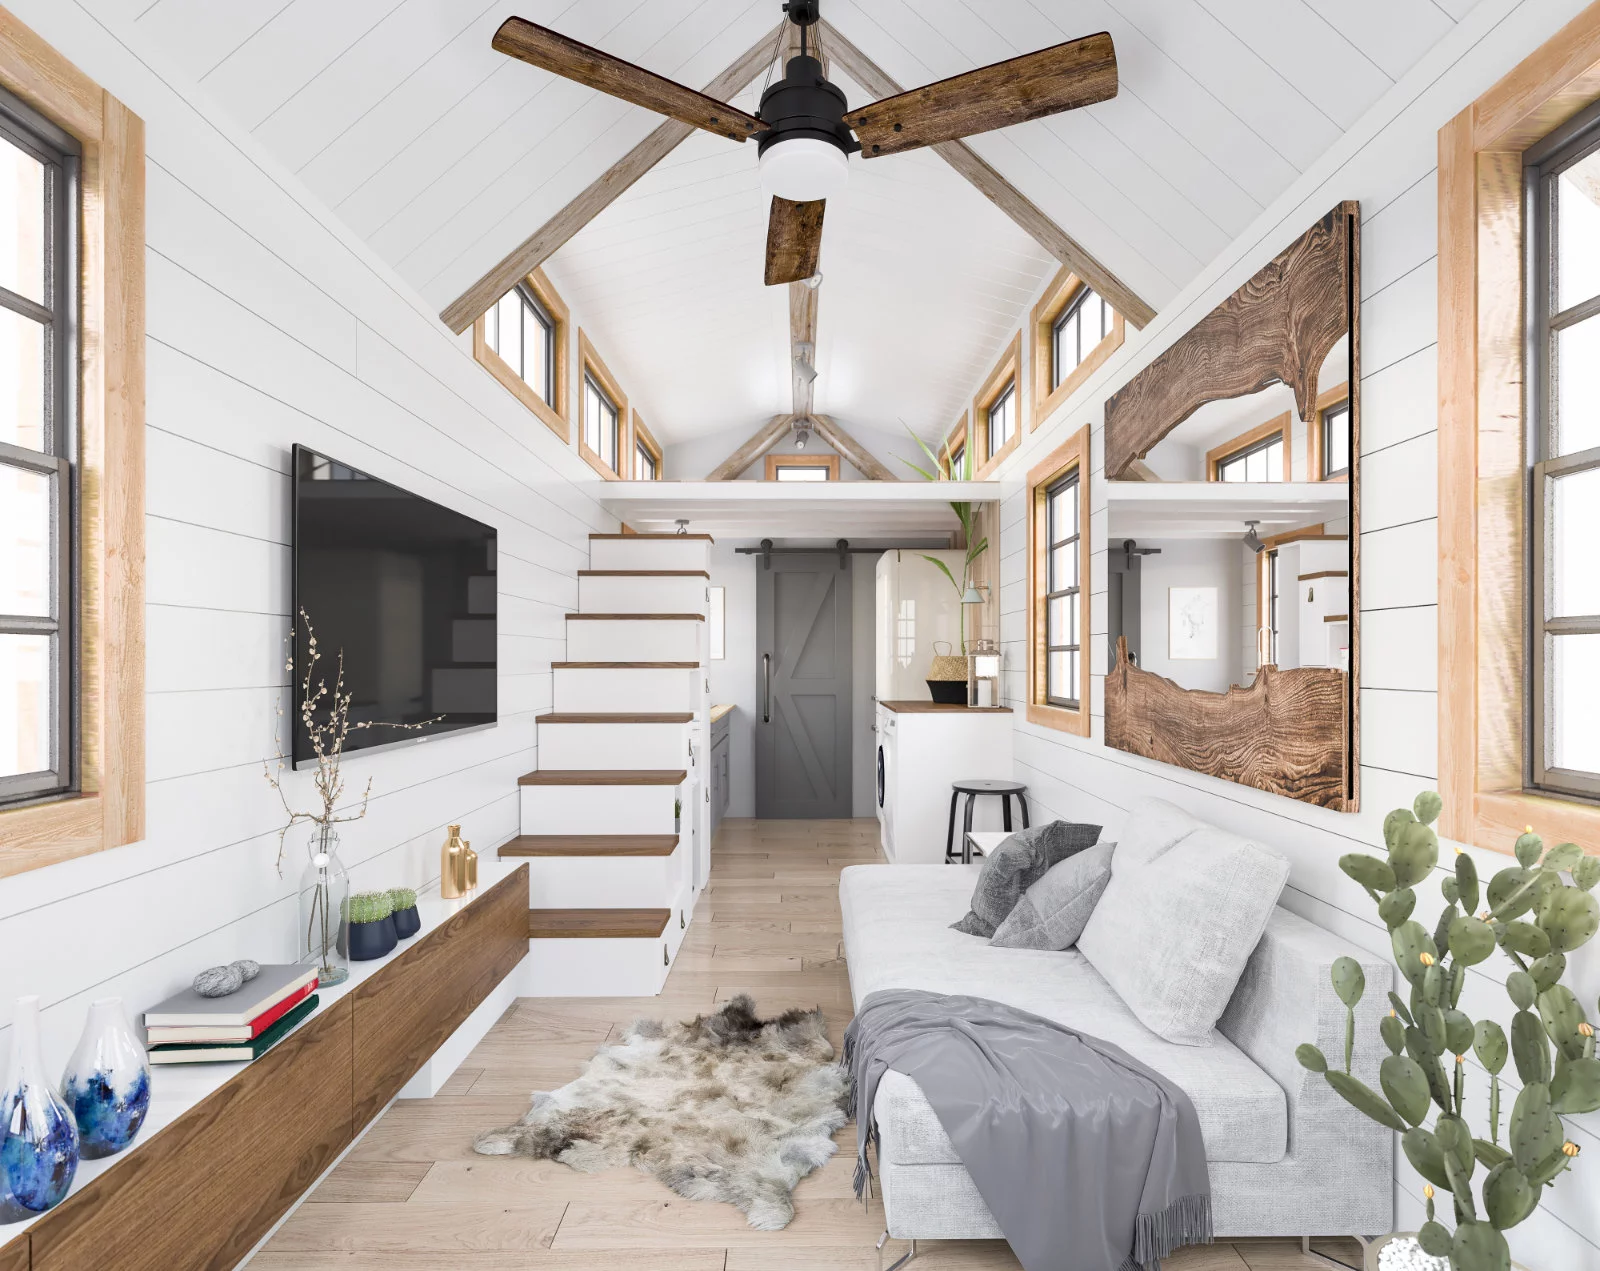 https://www.tinyhomebuilders.com/images/products/tiny-living/tiny-living-tiny-house-interior-1.webp